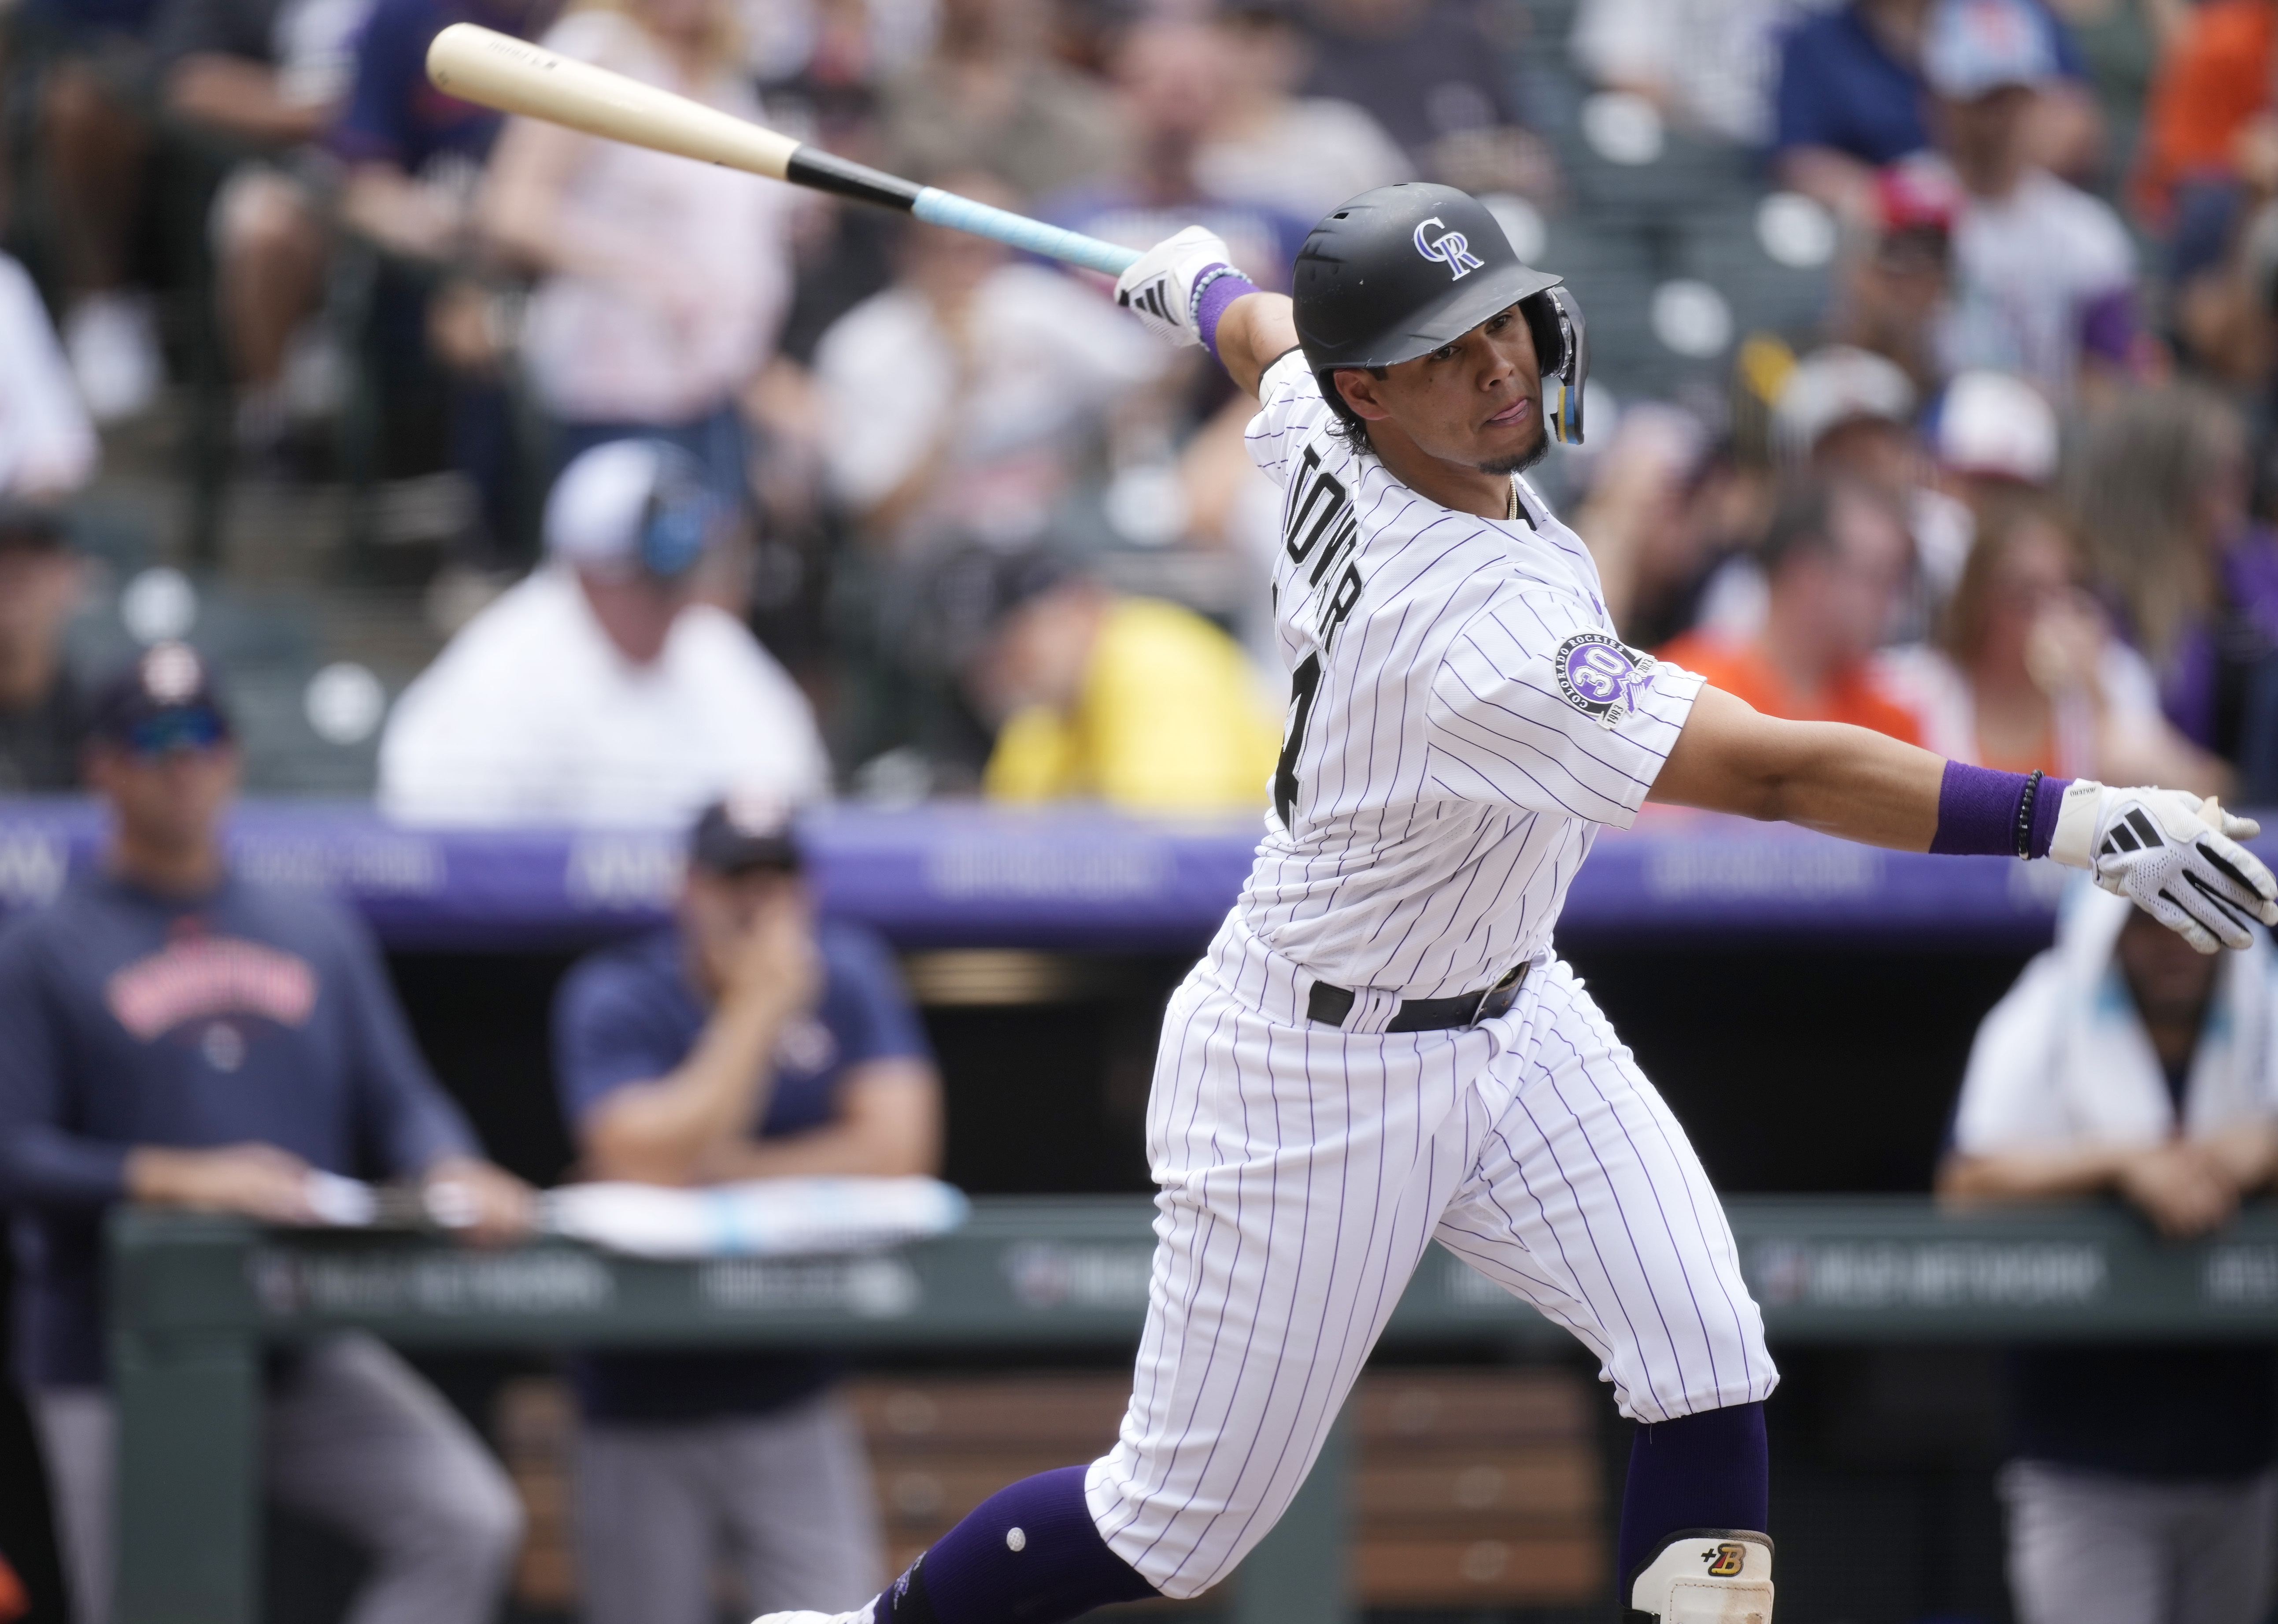 Colorado Rockies beat the Nationals for their seventh win of road